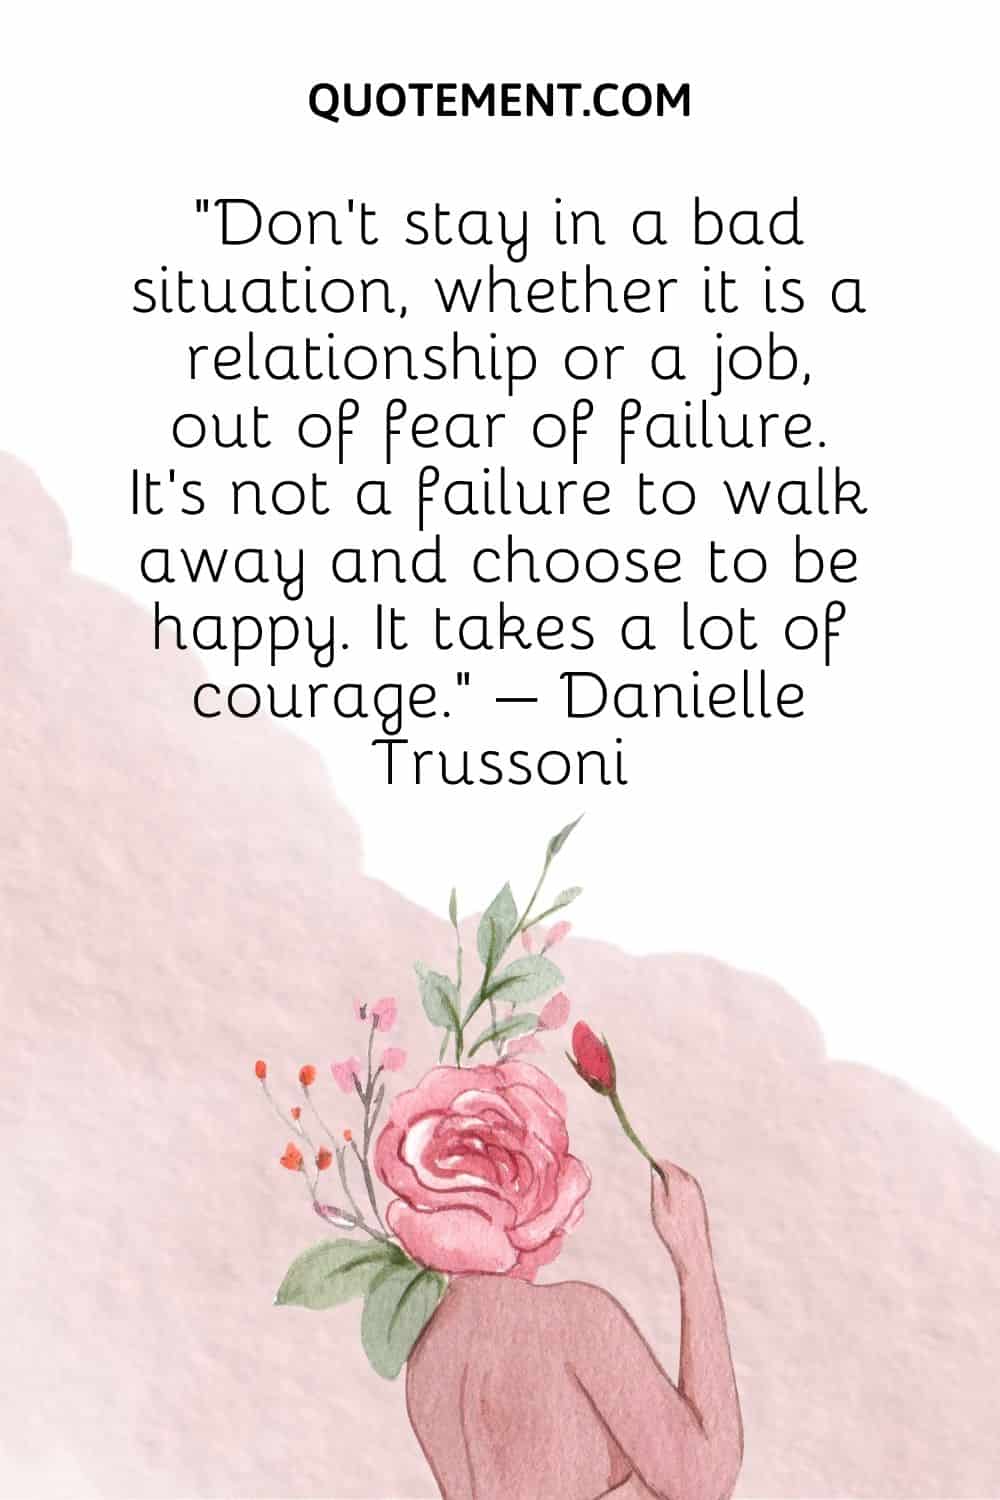 Don't stay in a bad situation, whether it is a relationship or a job, out of fear of failure. It's not a failure to walk away and choose to be happy. It takes a lot of courage. – Danielle Trussoni